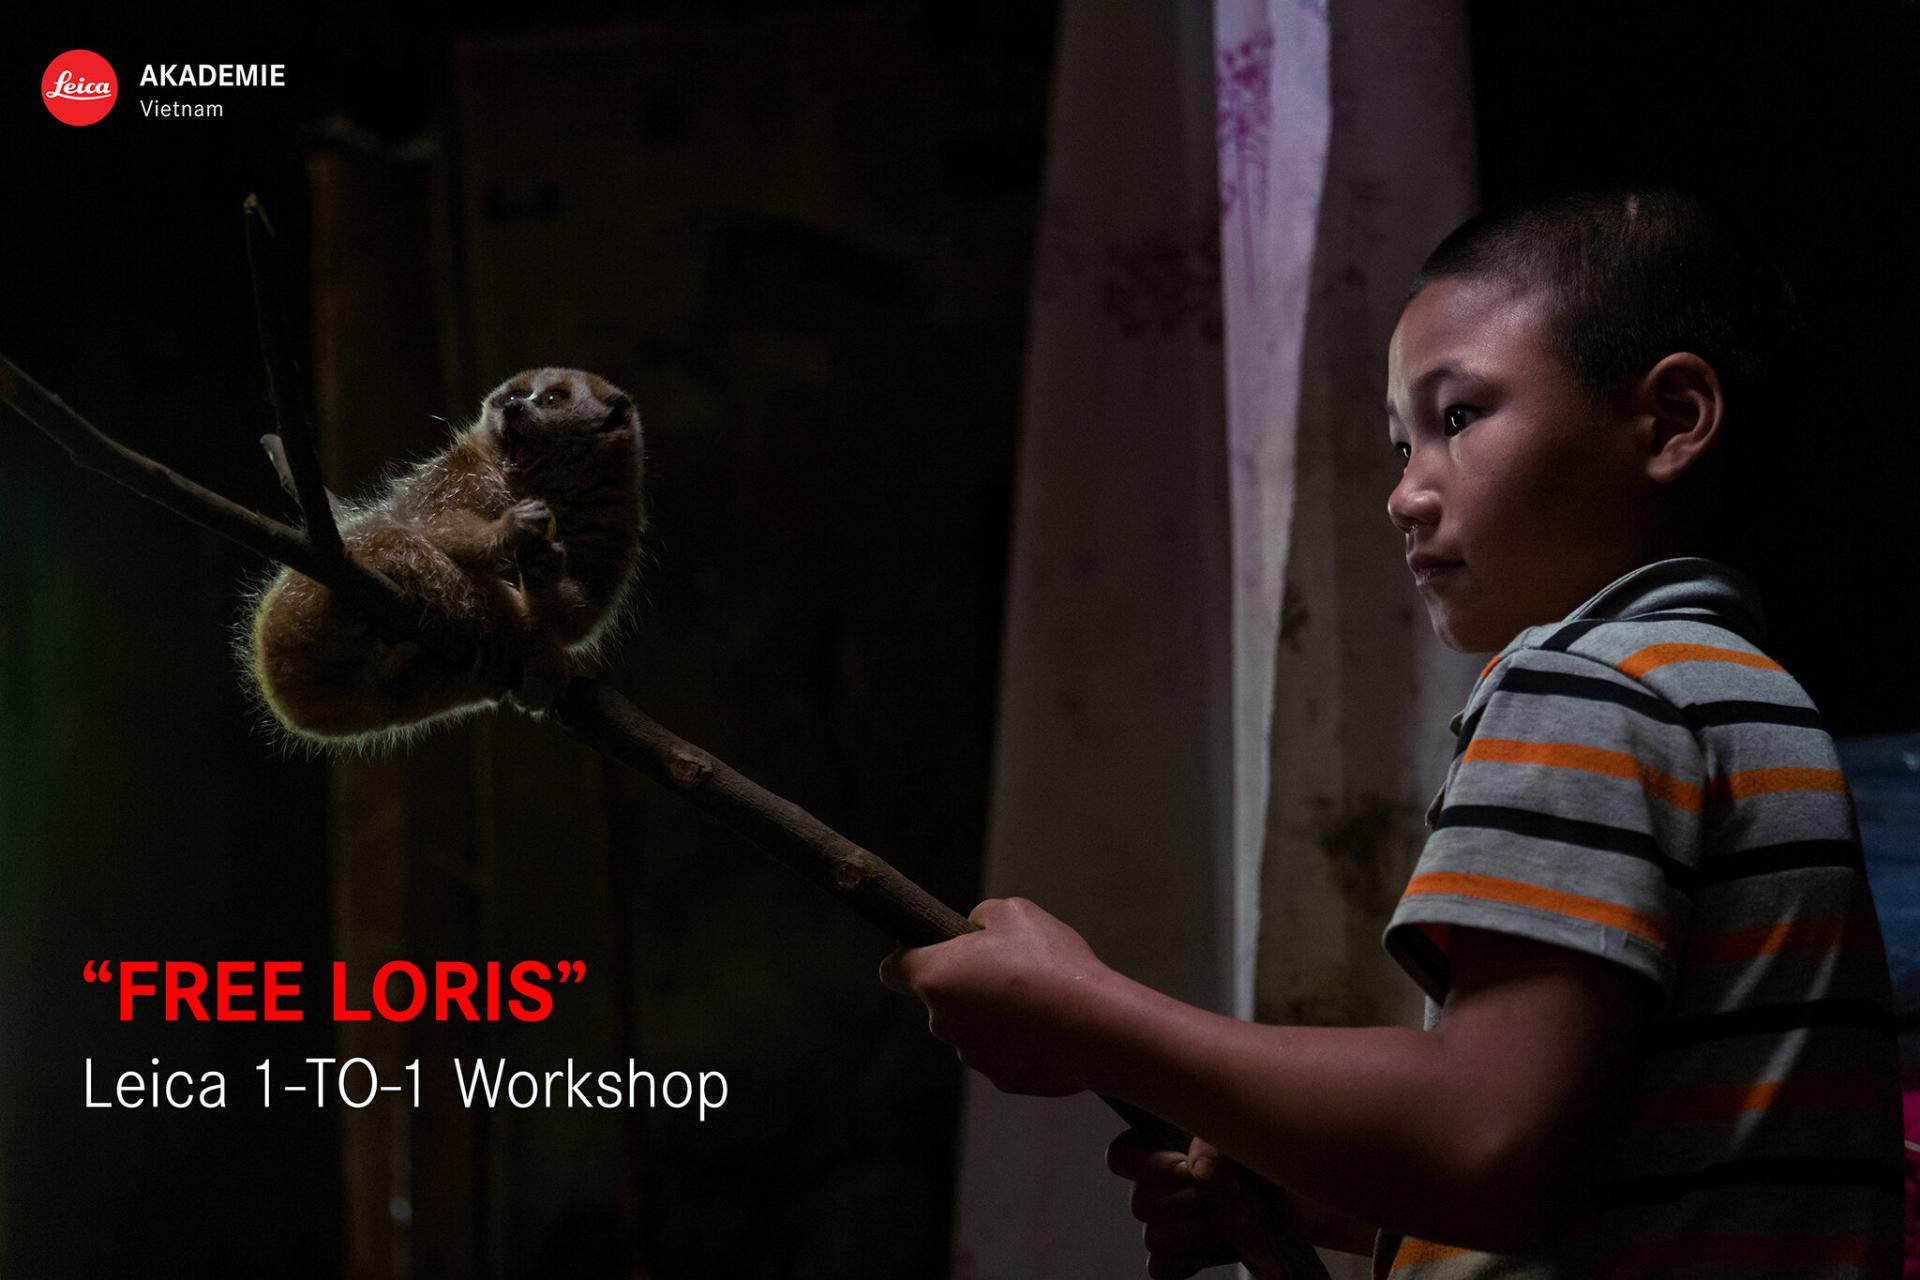 LEICA AKADEMIE | 1-TO-1 WORKSHOP WITH TRAN ANH DUY PHIMASSET